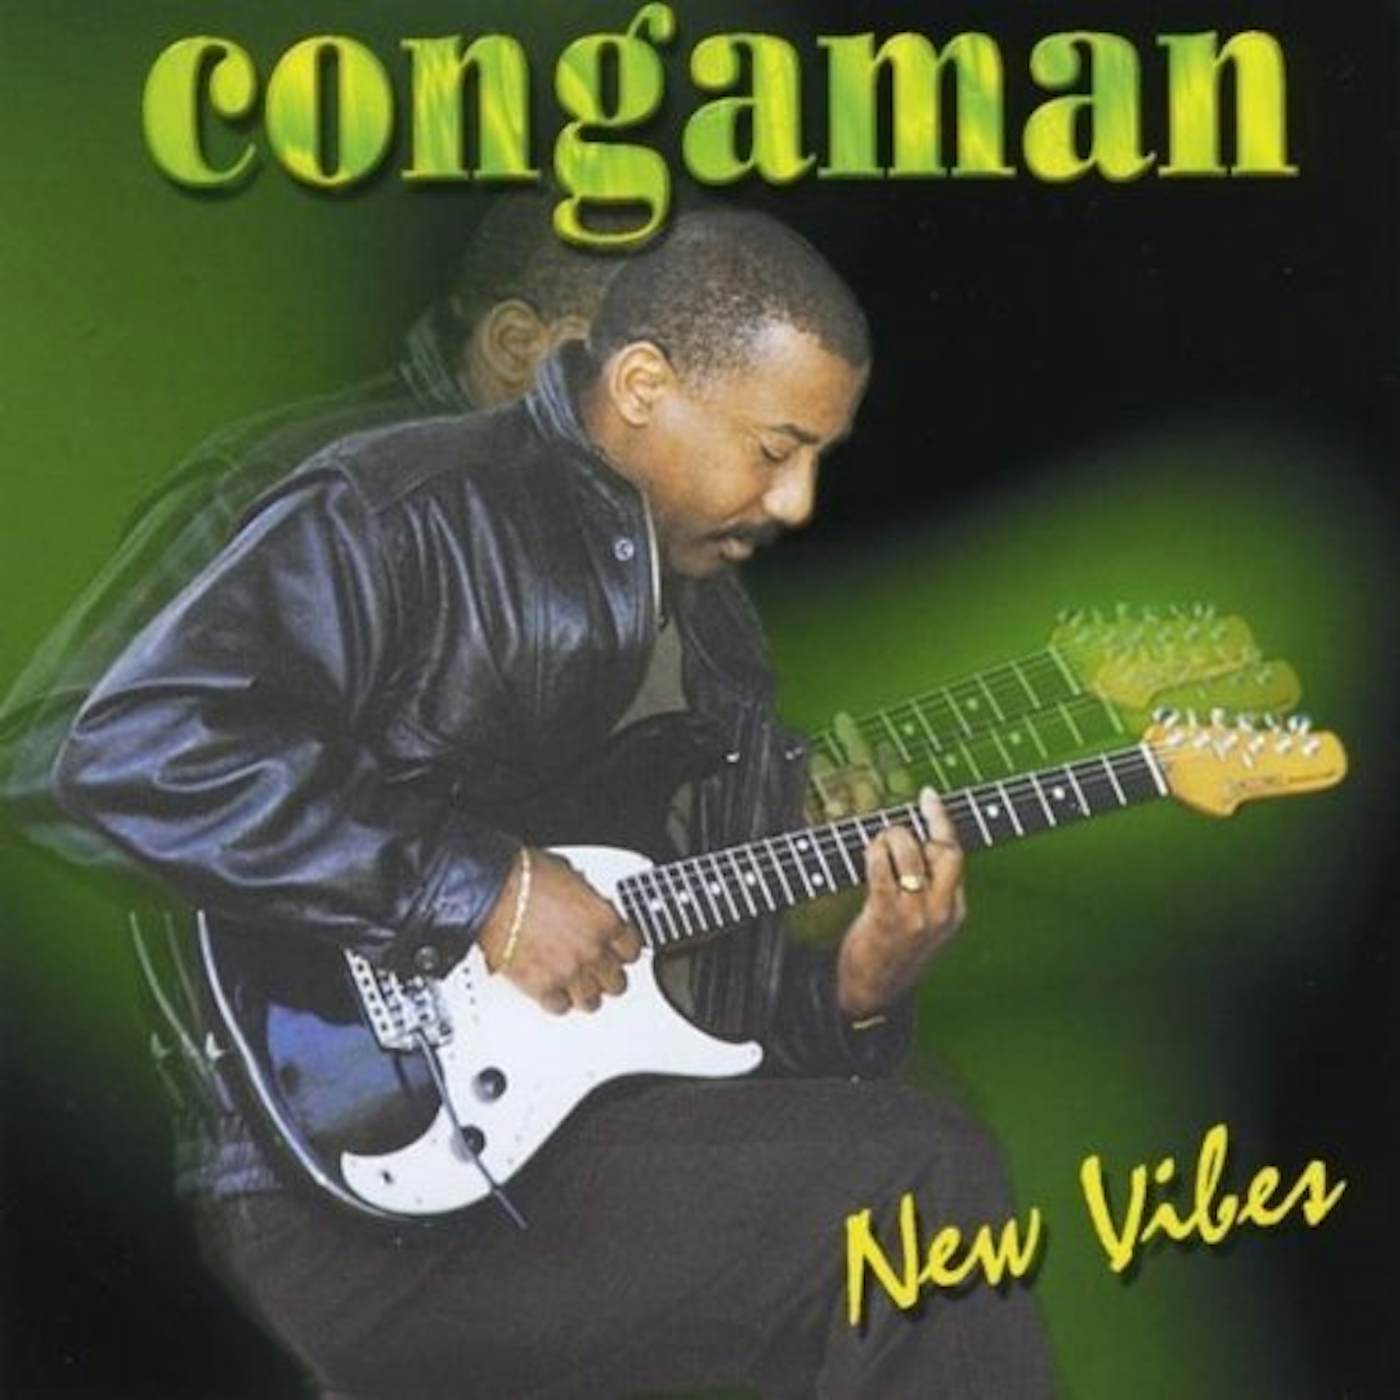 Congaman NEW VIBES CD